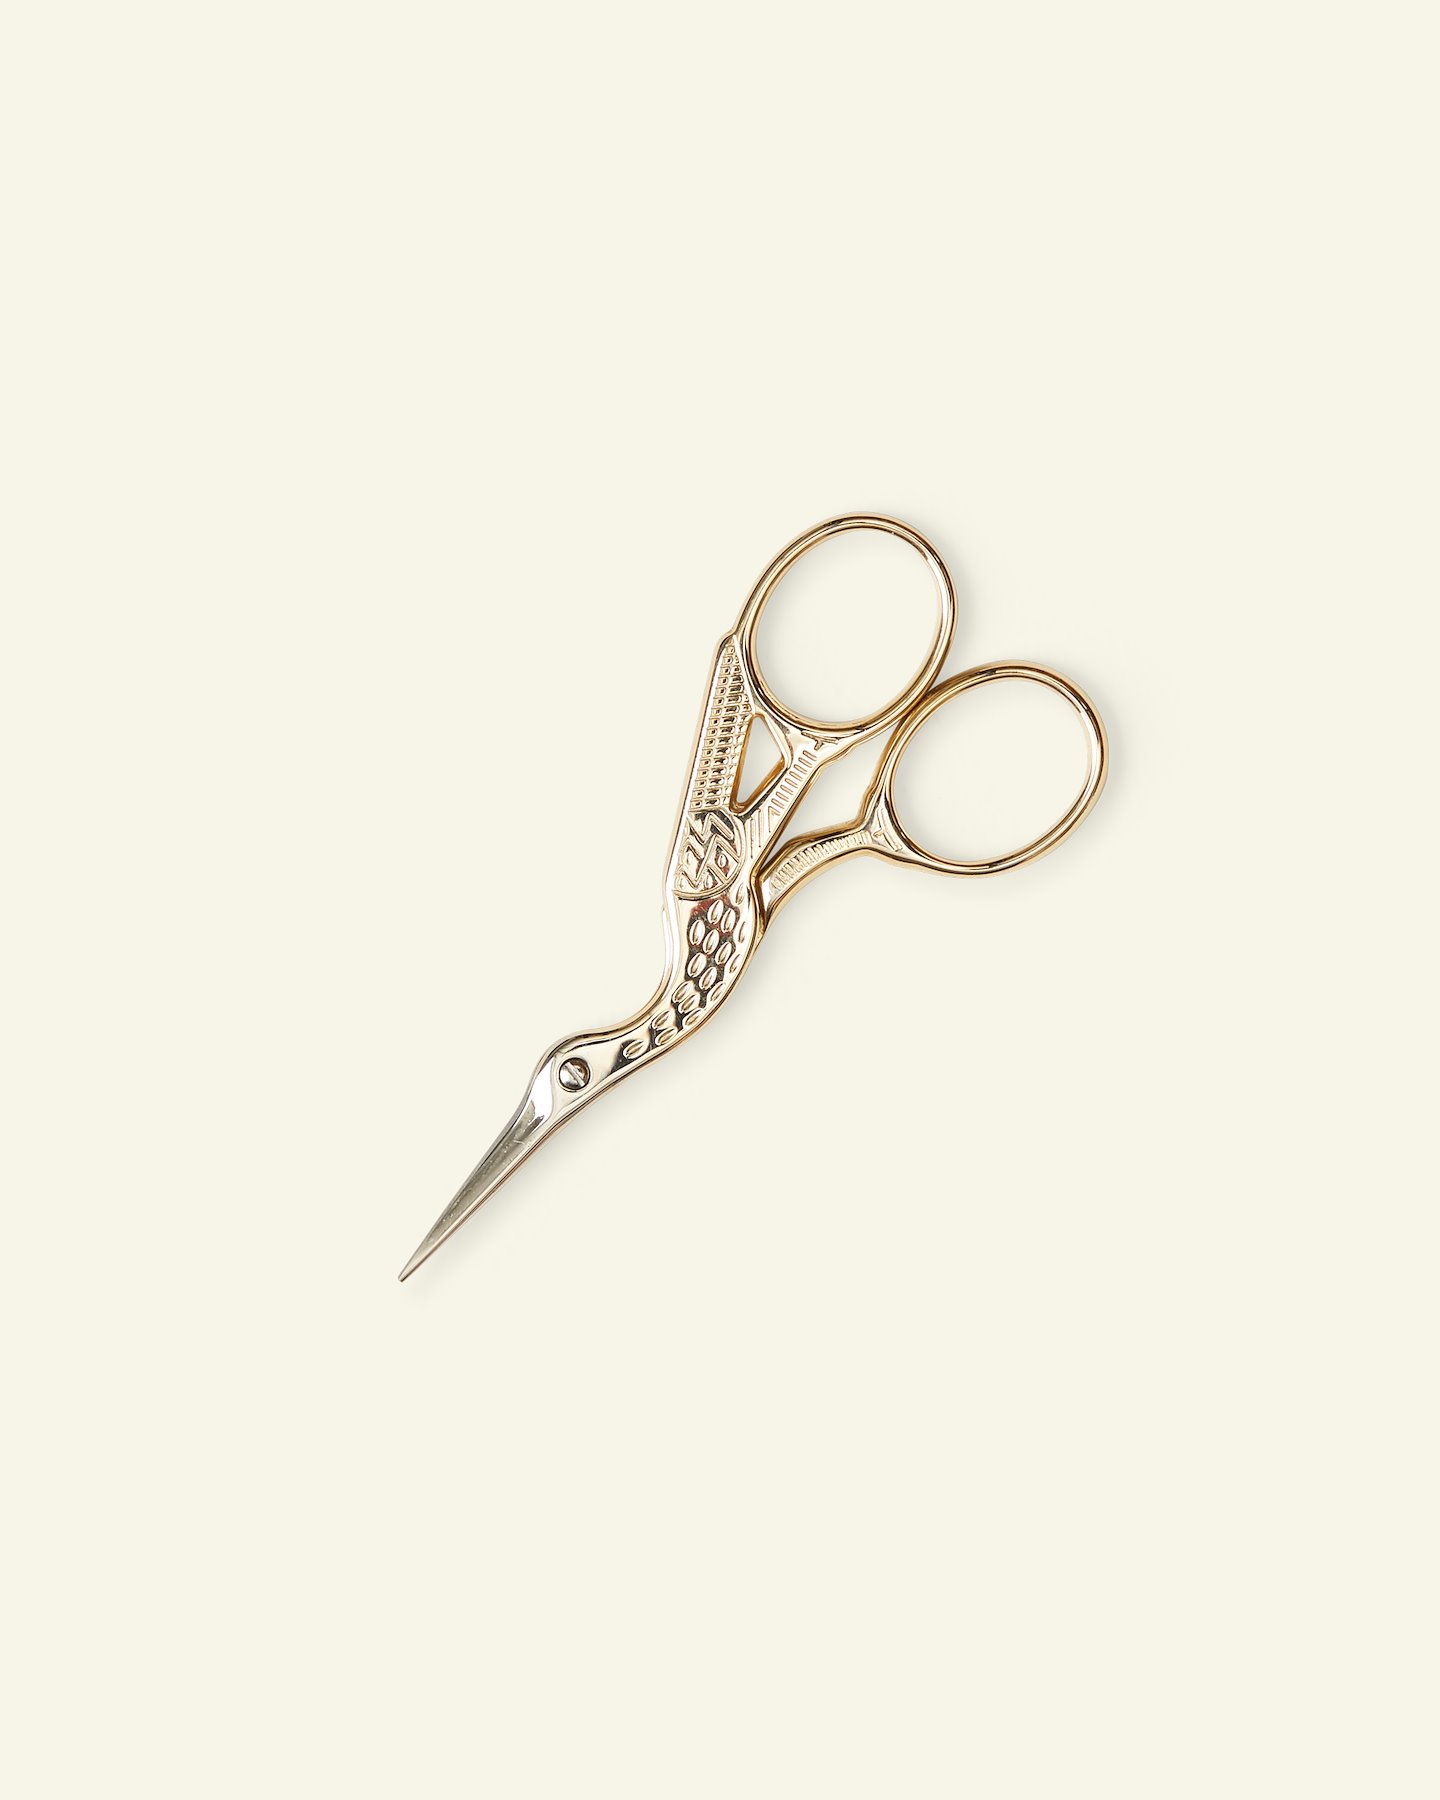 Embroidery scissors stork 9cm gold col. 42012_pack